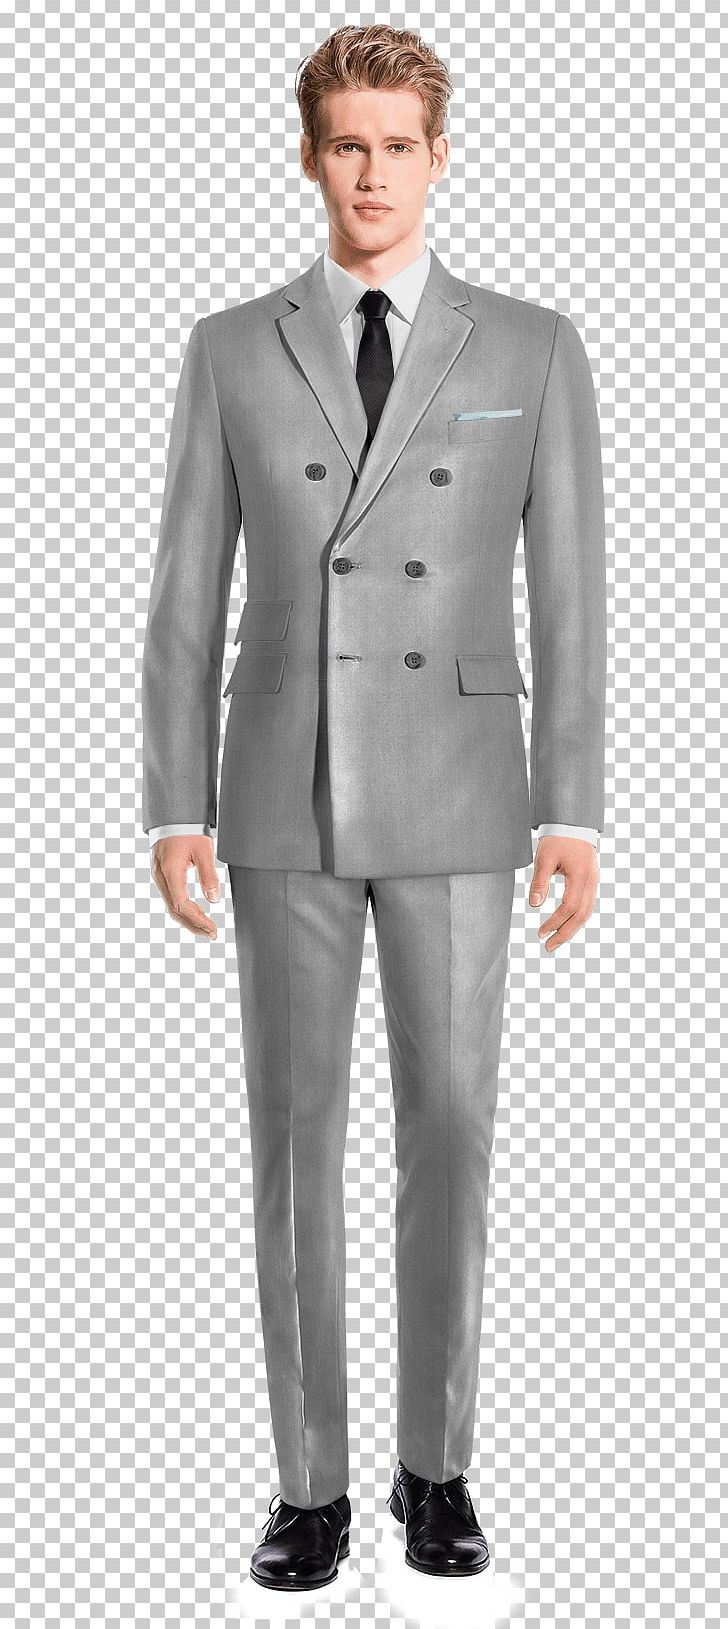 Suit Pants Upturned Collar Wedding Dress Sport Coat PNG, Clipart, Blazer, Businessperson, Corduroy, Costume, Doublebreasted Free PNG Download